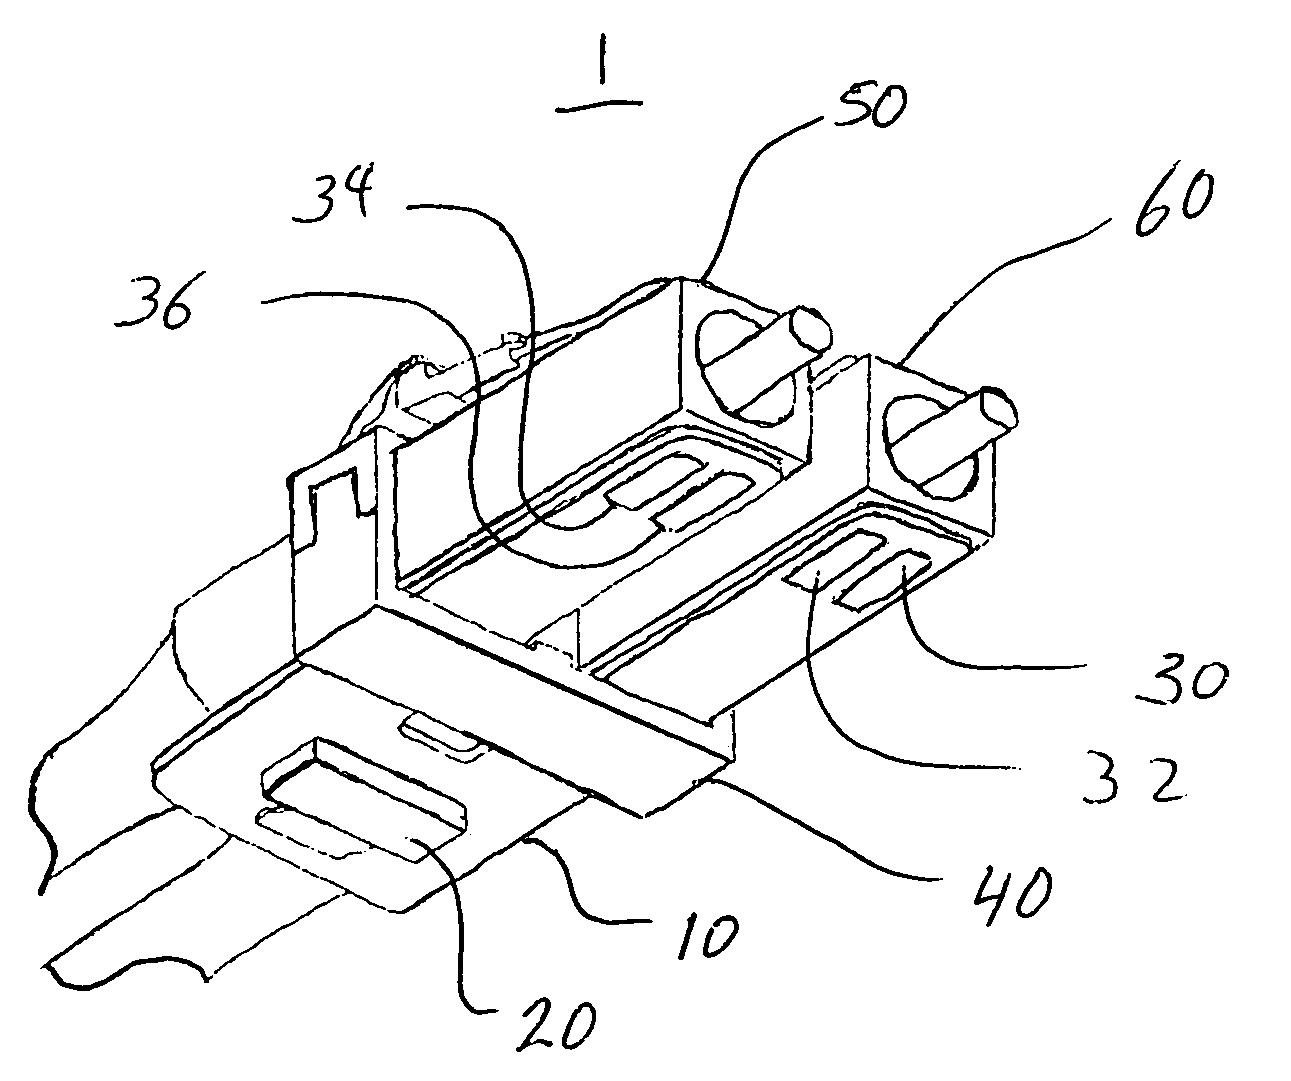 Transceiver/fiber optic connector adaptor with patch cord ID reading capability